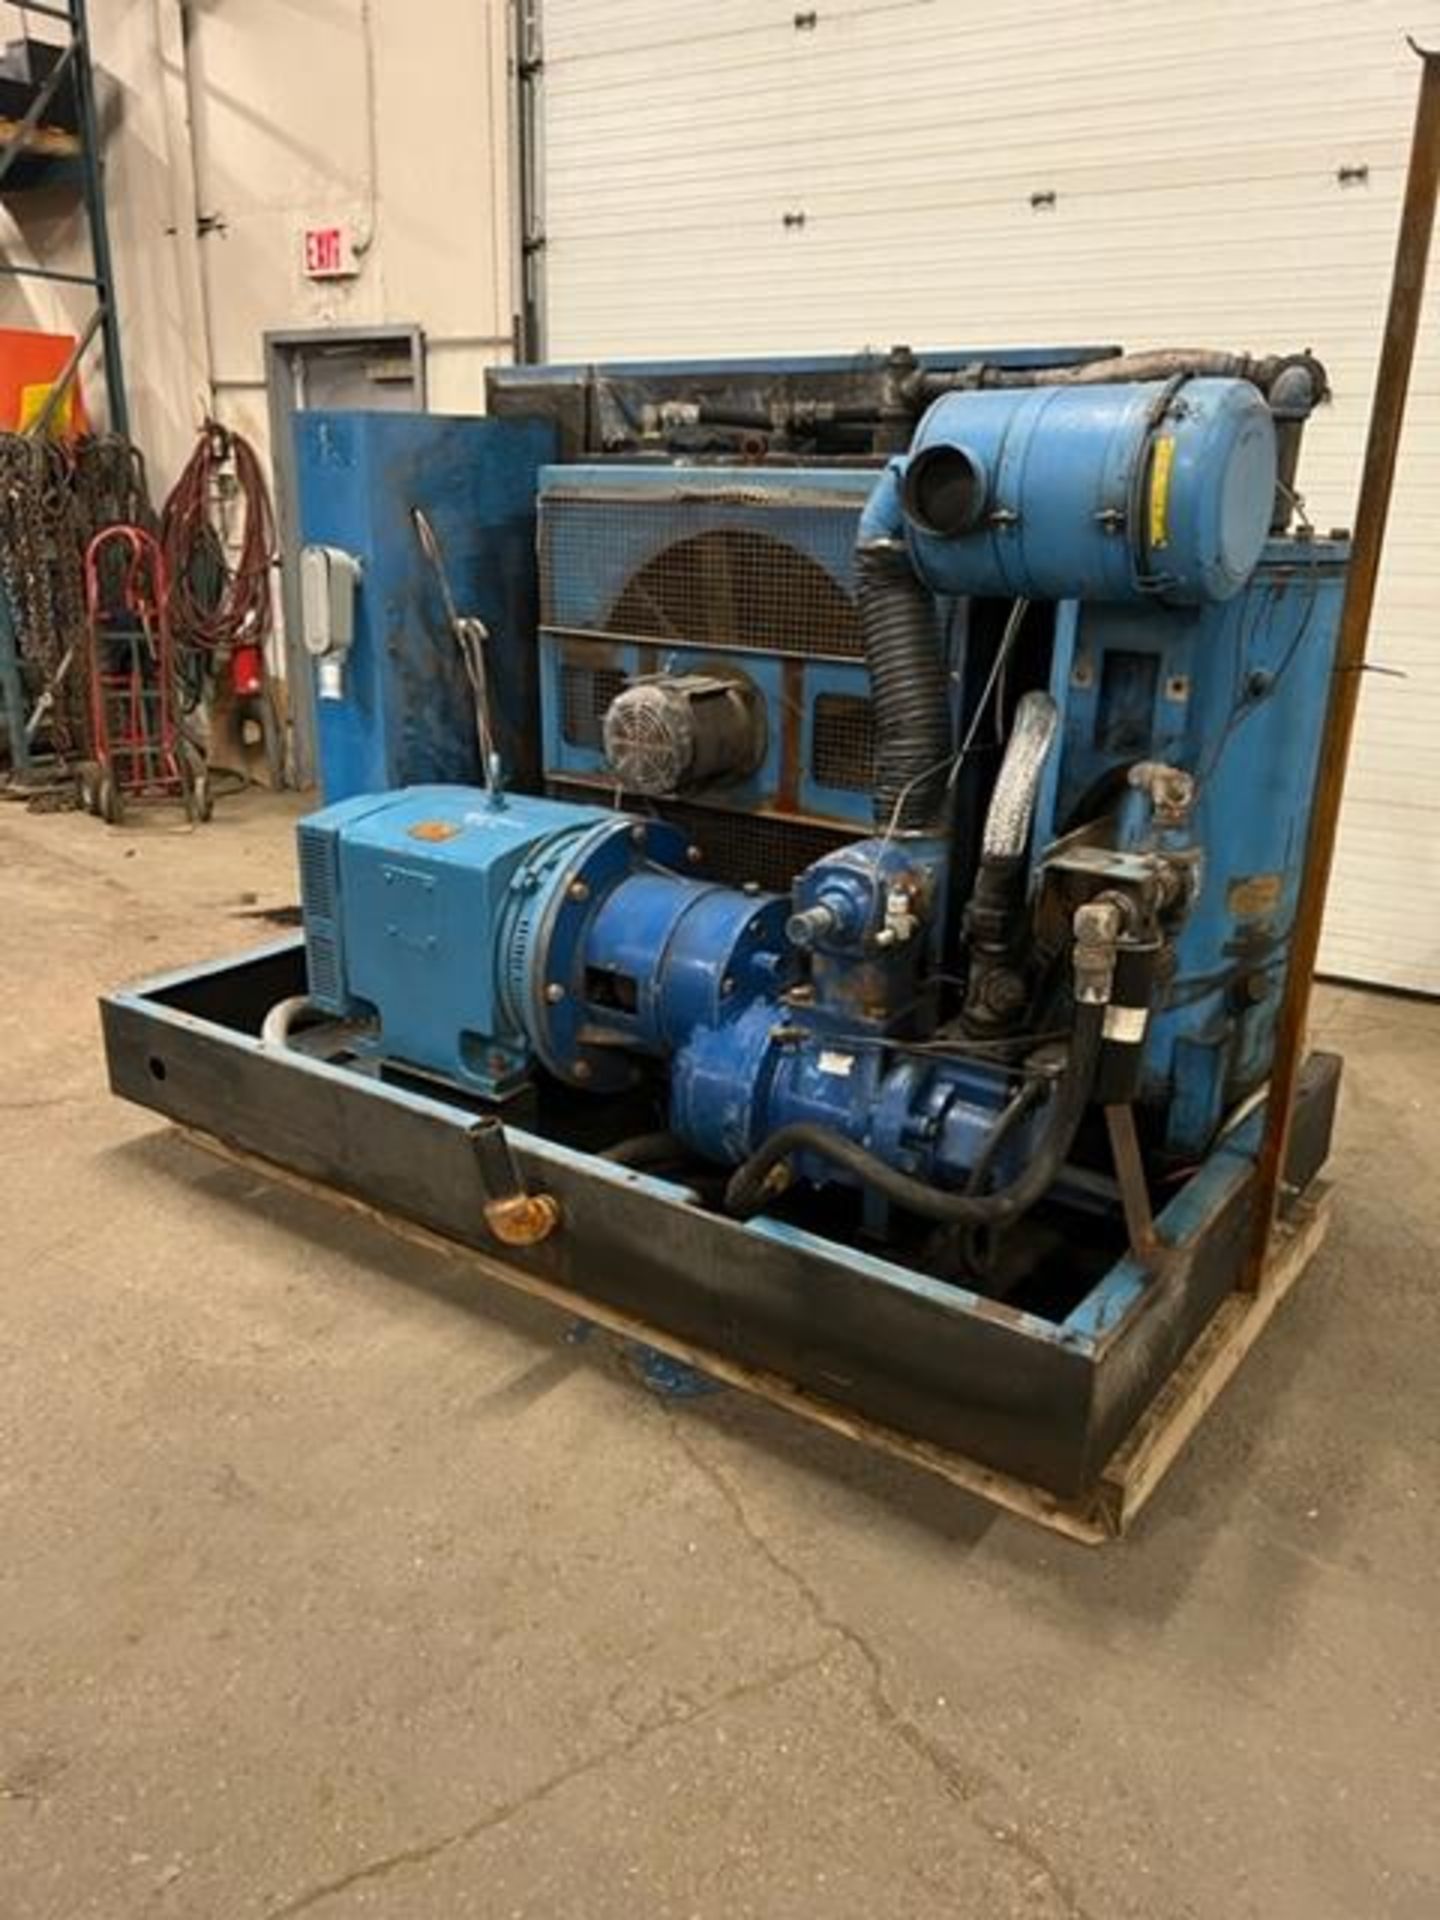 CompAir 125HP Rotary Screw Air Compressor BRAND NEW REBUILD in 2021 MINT - Image 2 of 3